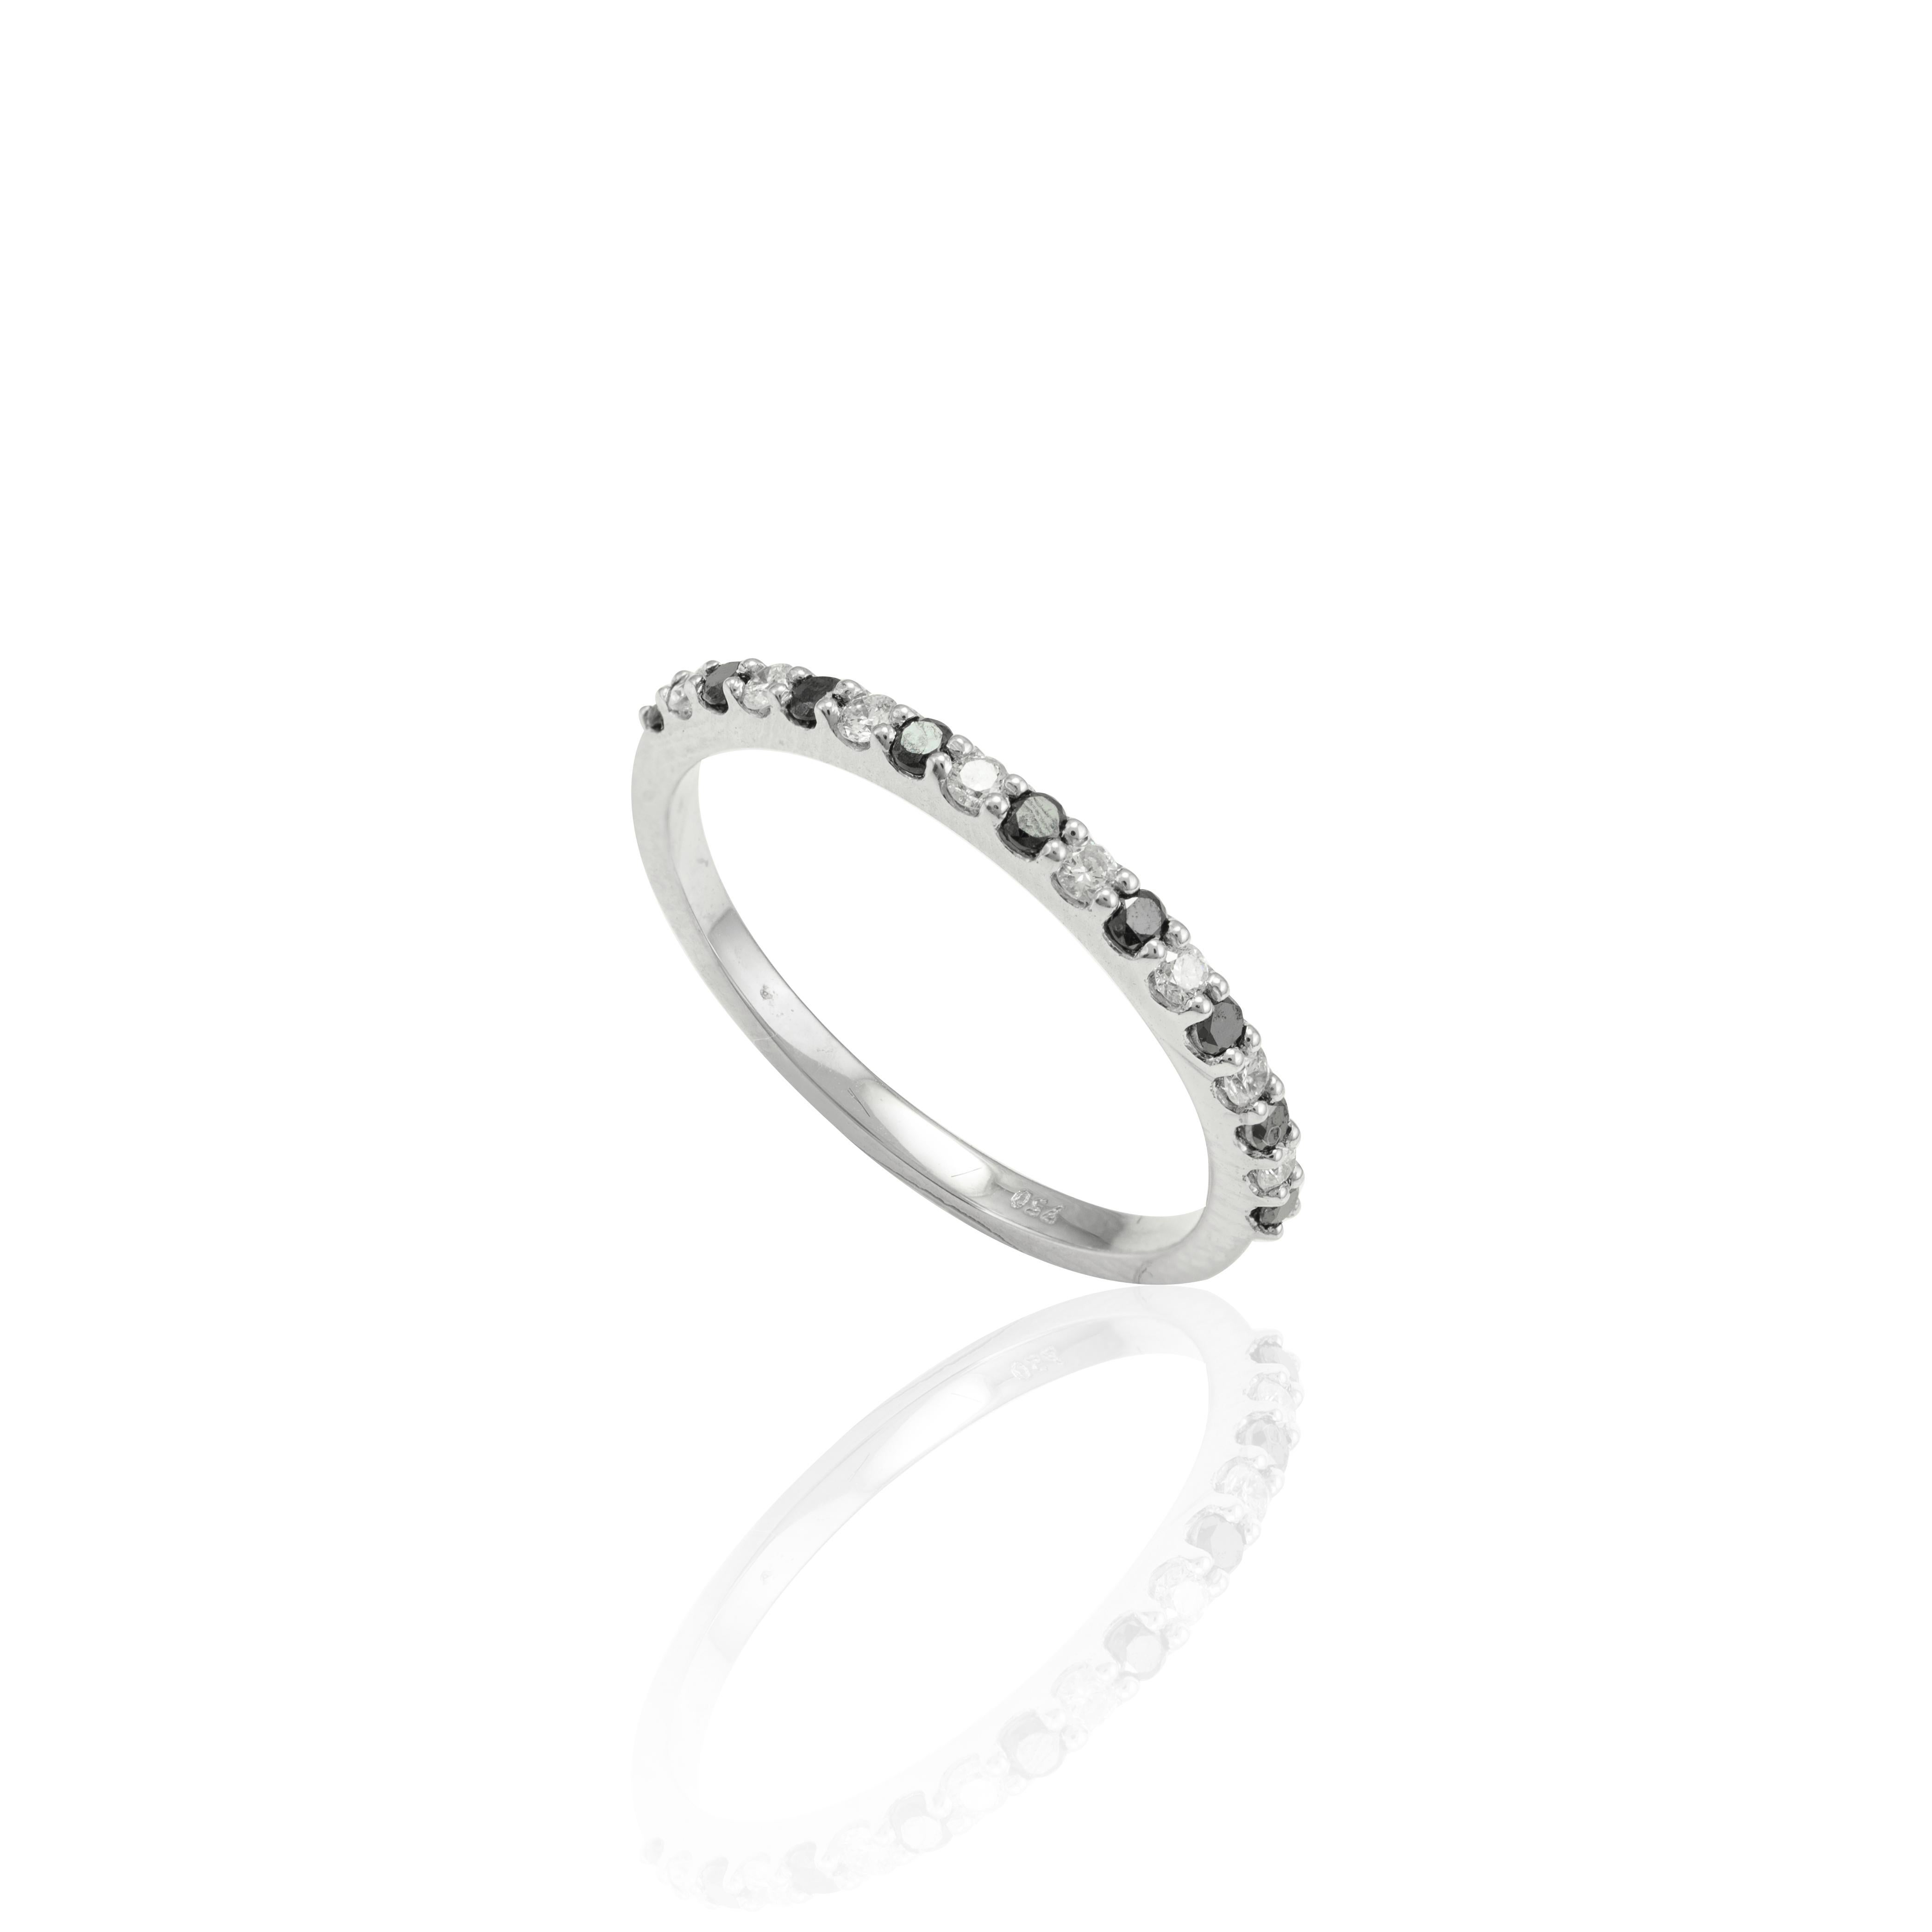 For Sale:  Natural Thin Diamond Wedding Band 18k Solid White Gold Stackable Diamond Ring 4